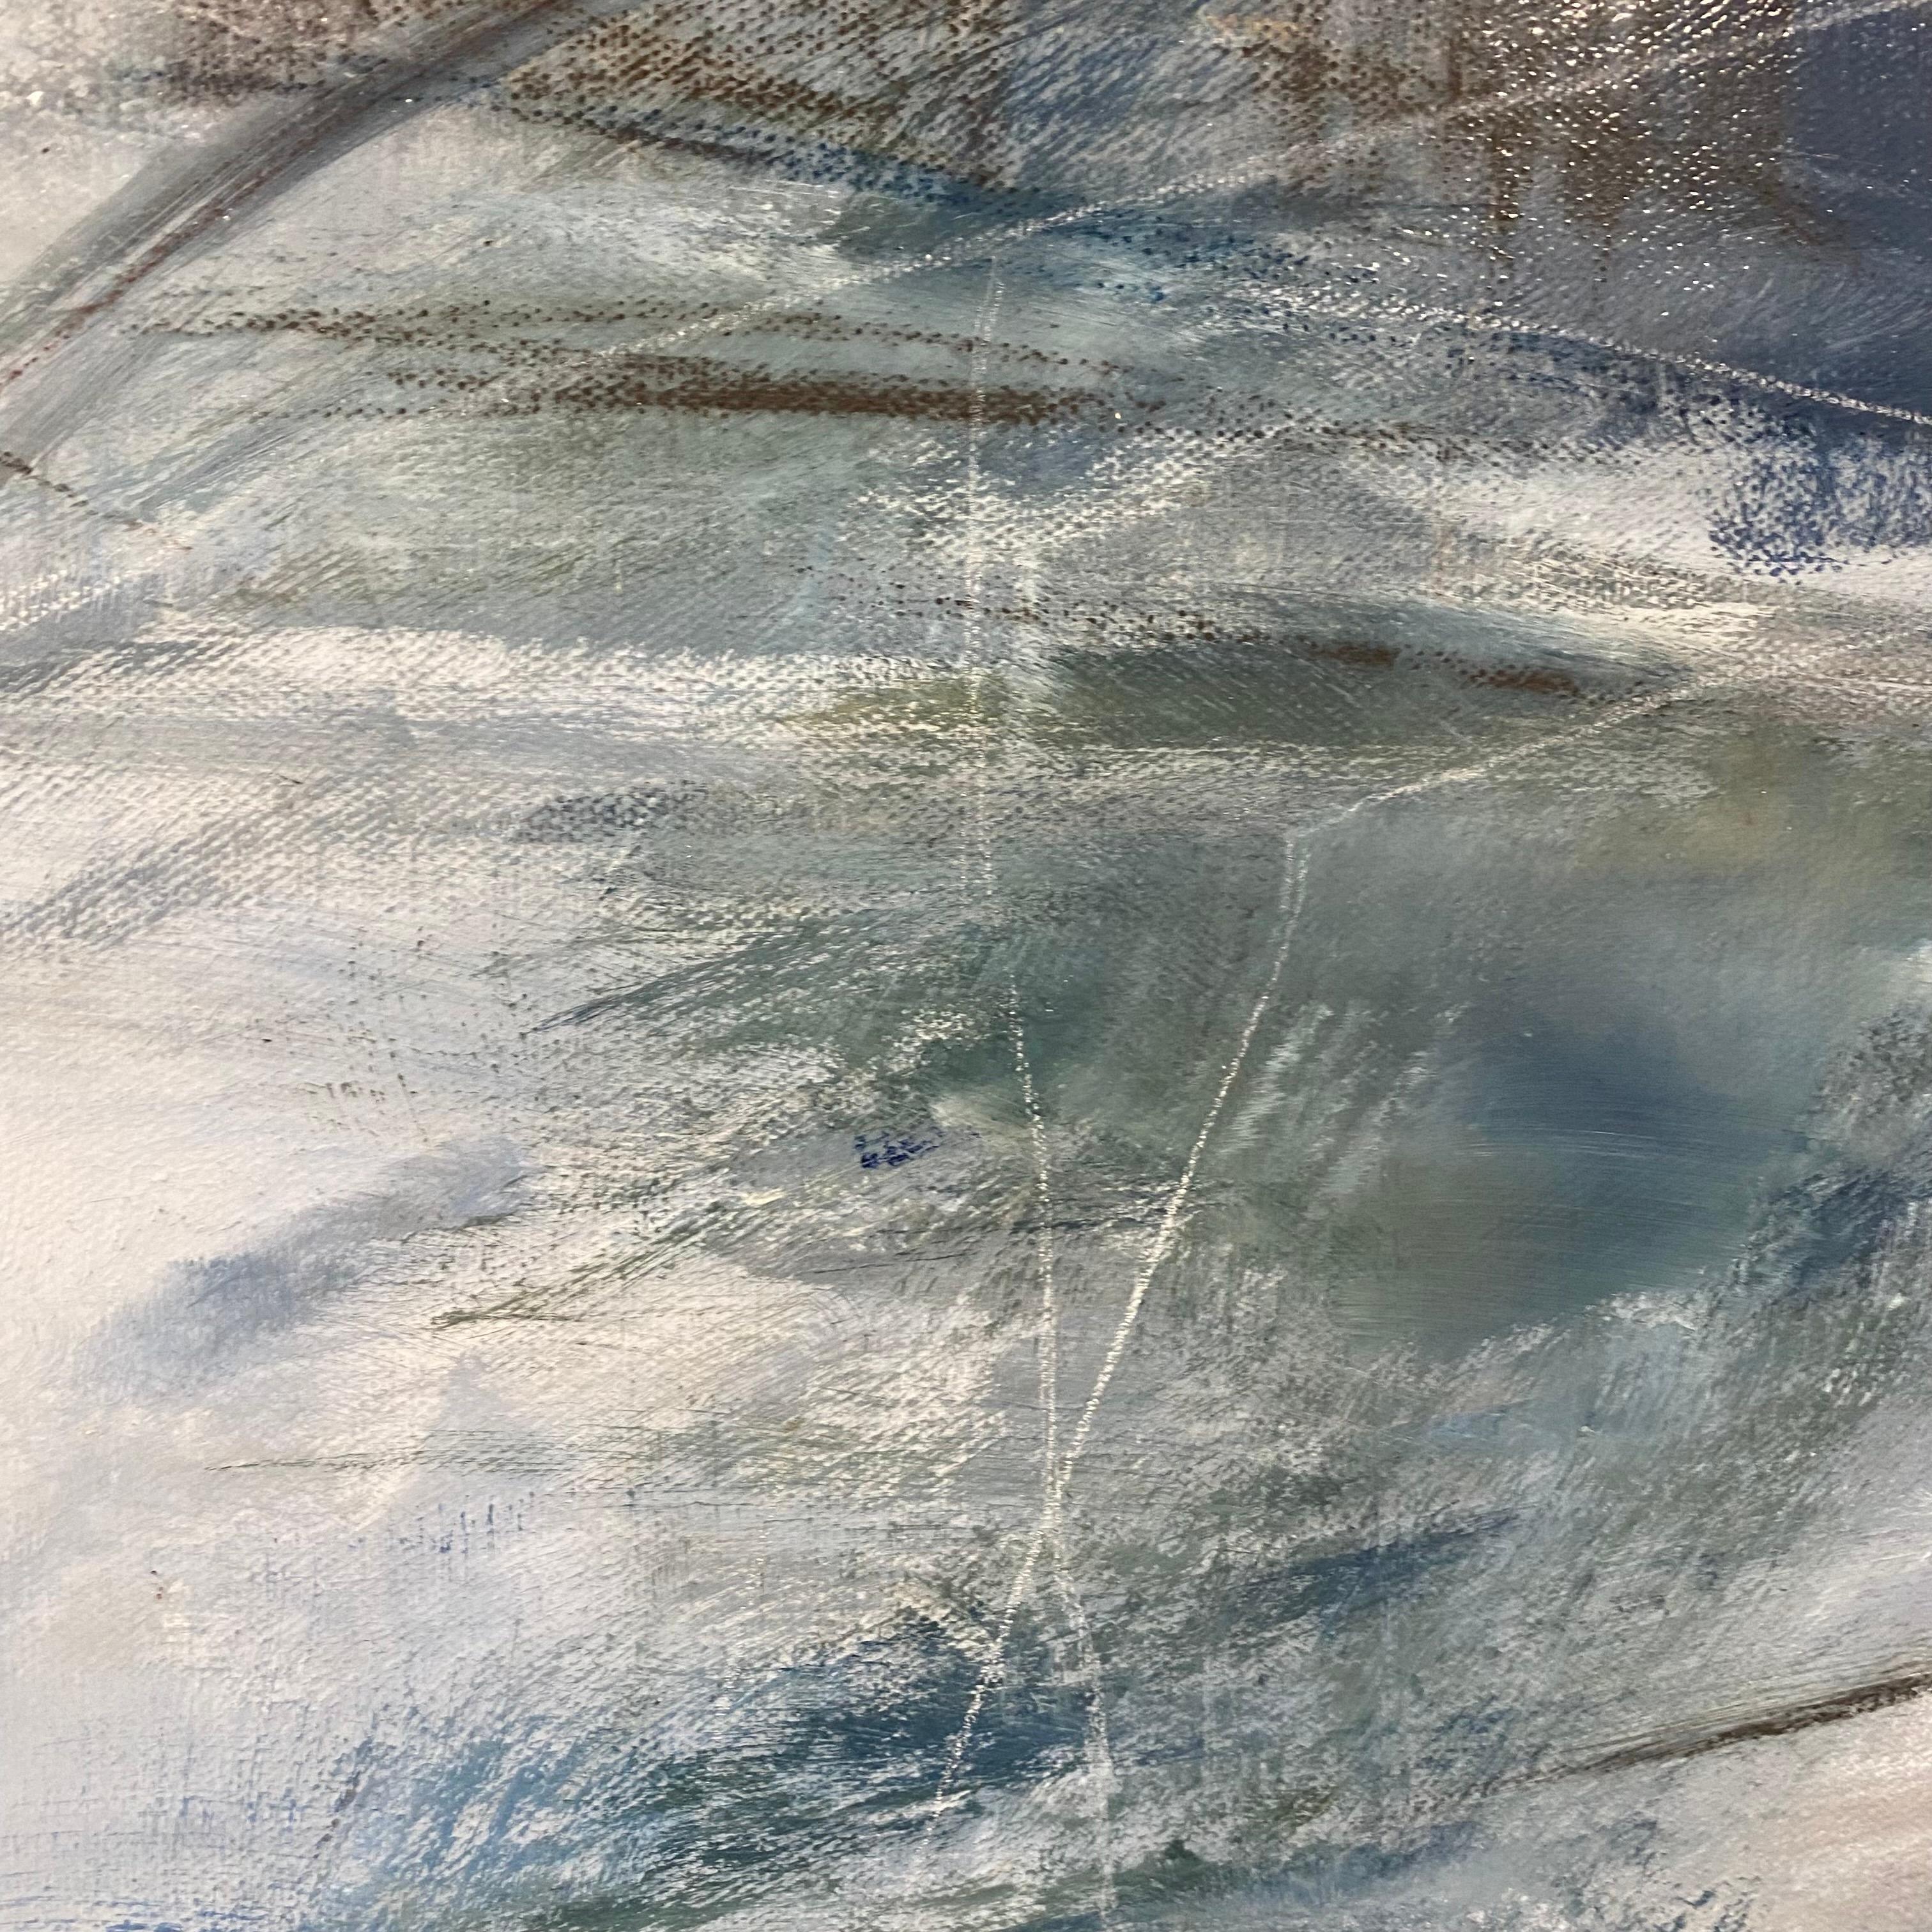 The way it started in January 2021 was I had been going for walks at a nearby creek and took photos and videos to hear the sounds at home. Then I got the idea of making abstract paintings inspired by the creek. After a while, I wanted a larger